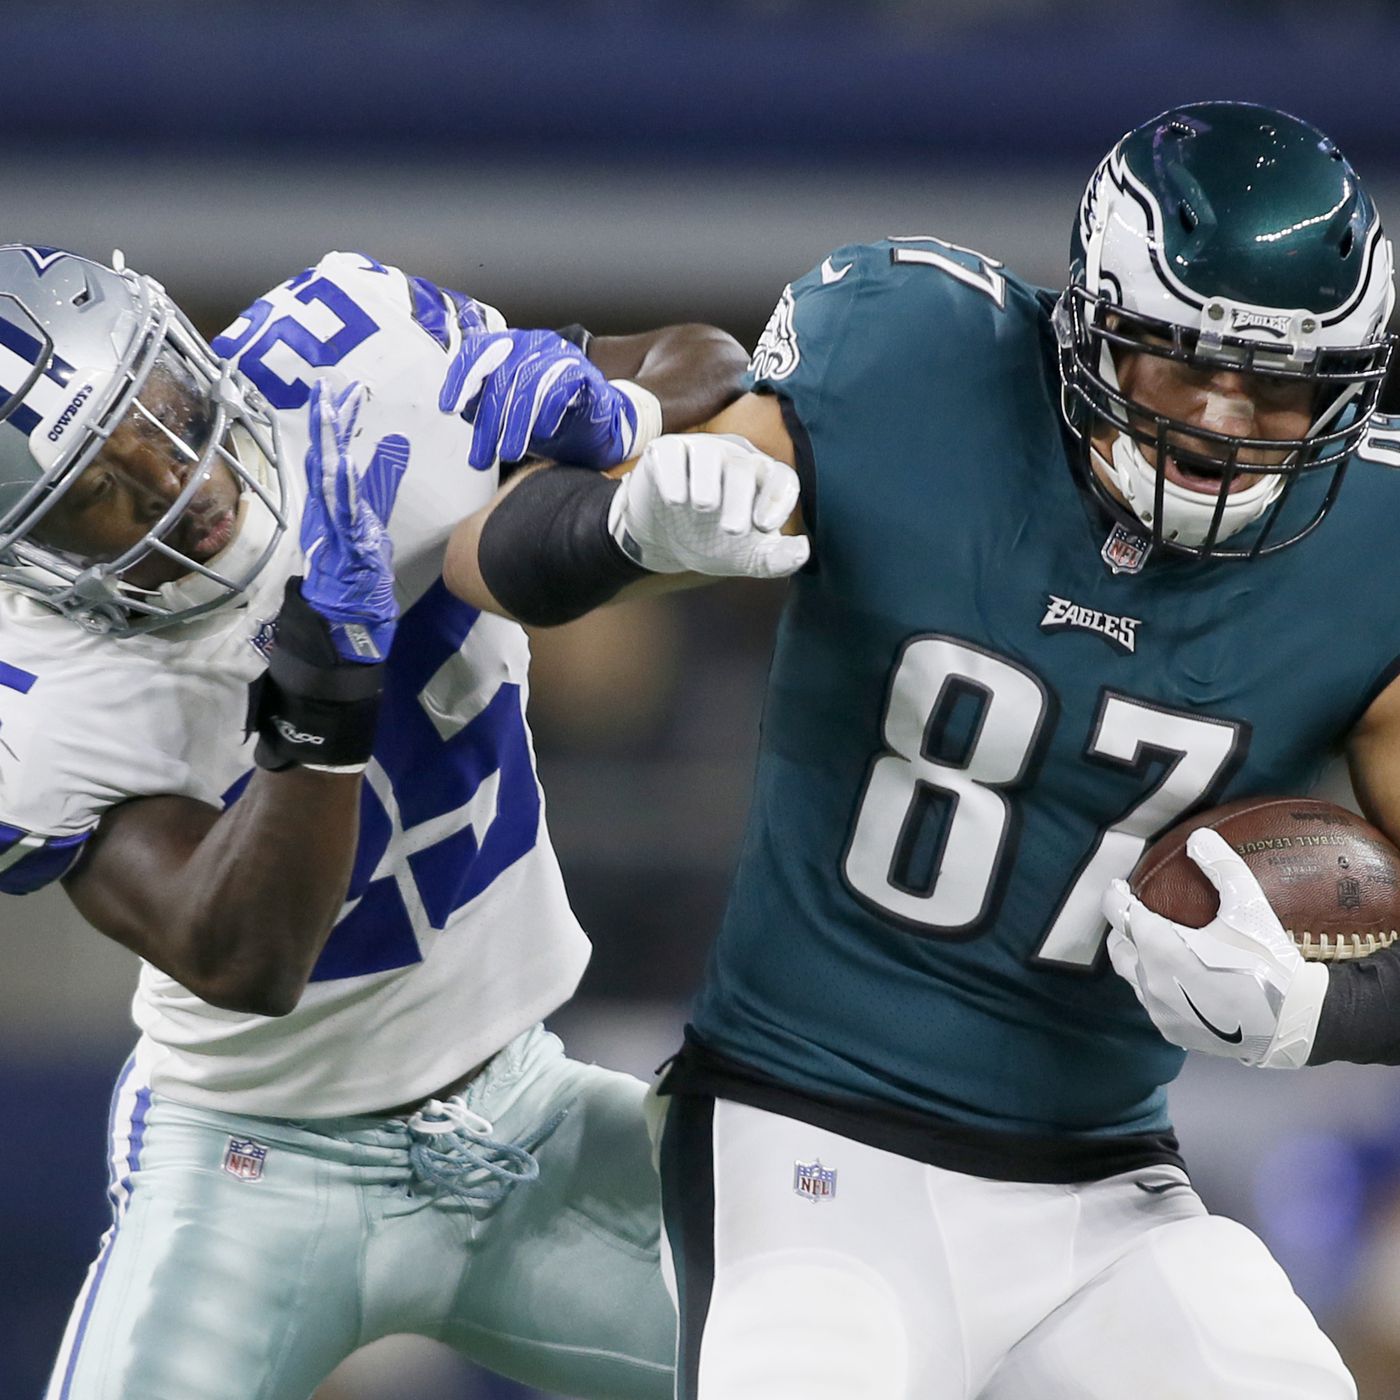 Eagles vs. Cowboys 2017 live results: Score updates and highlights 